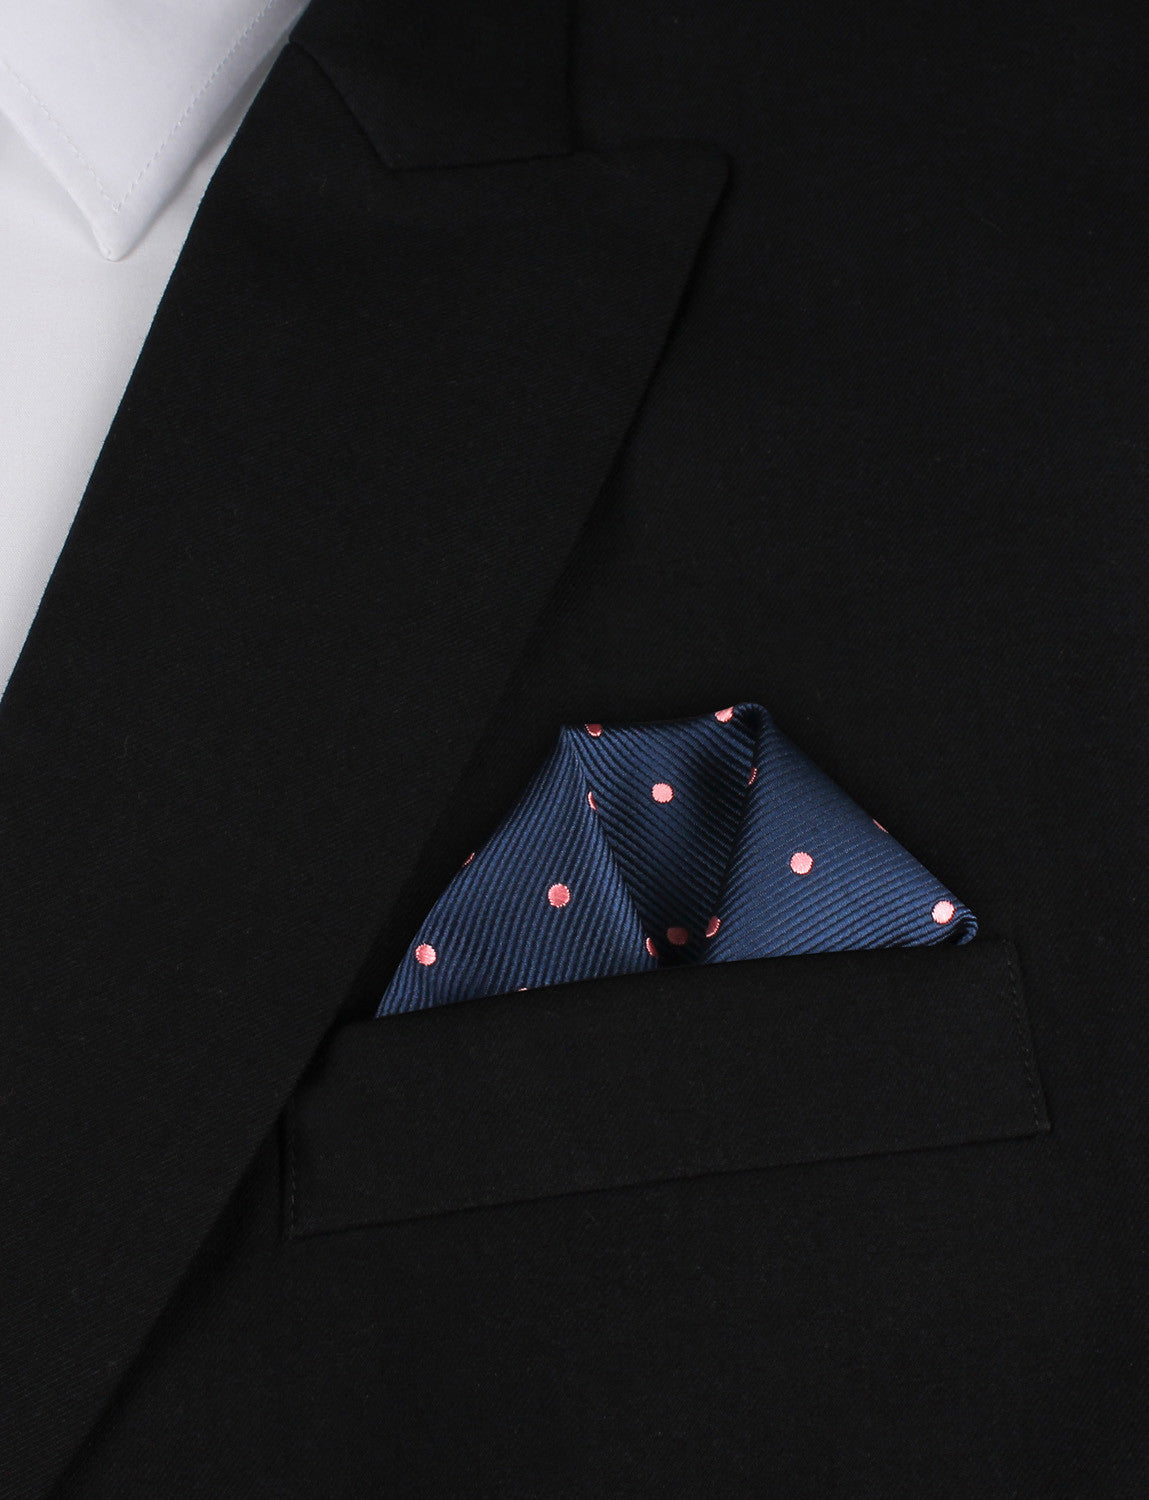 Navy Blue with Pink Polka Dots - Winged Puff Pocket Square Fold